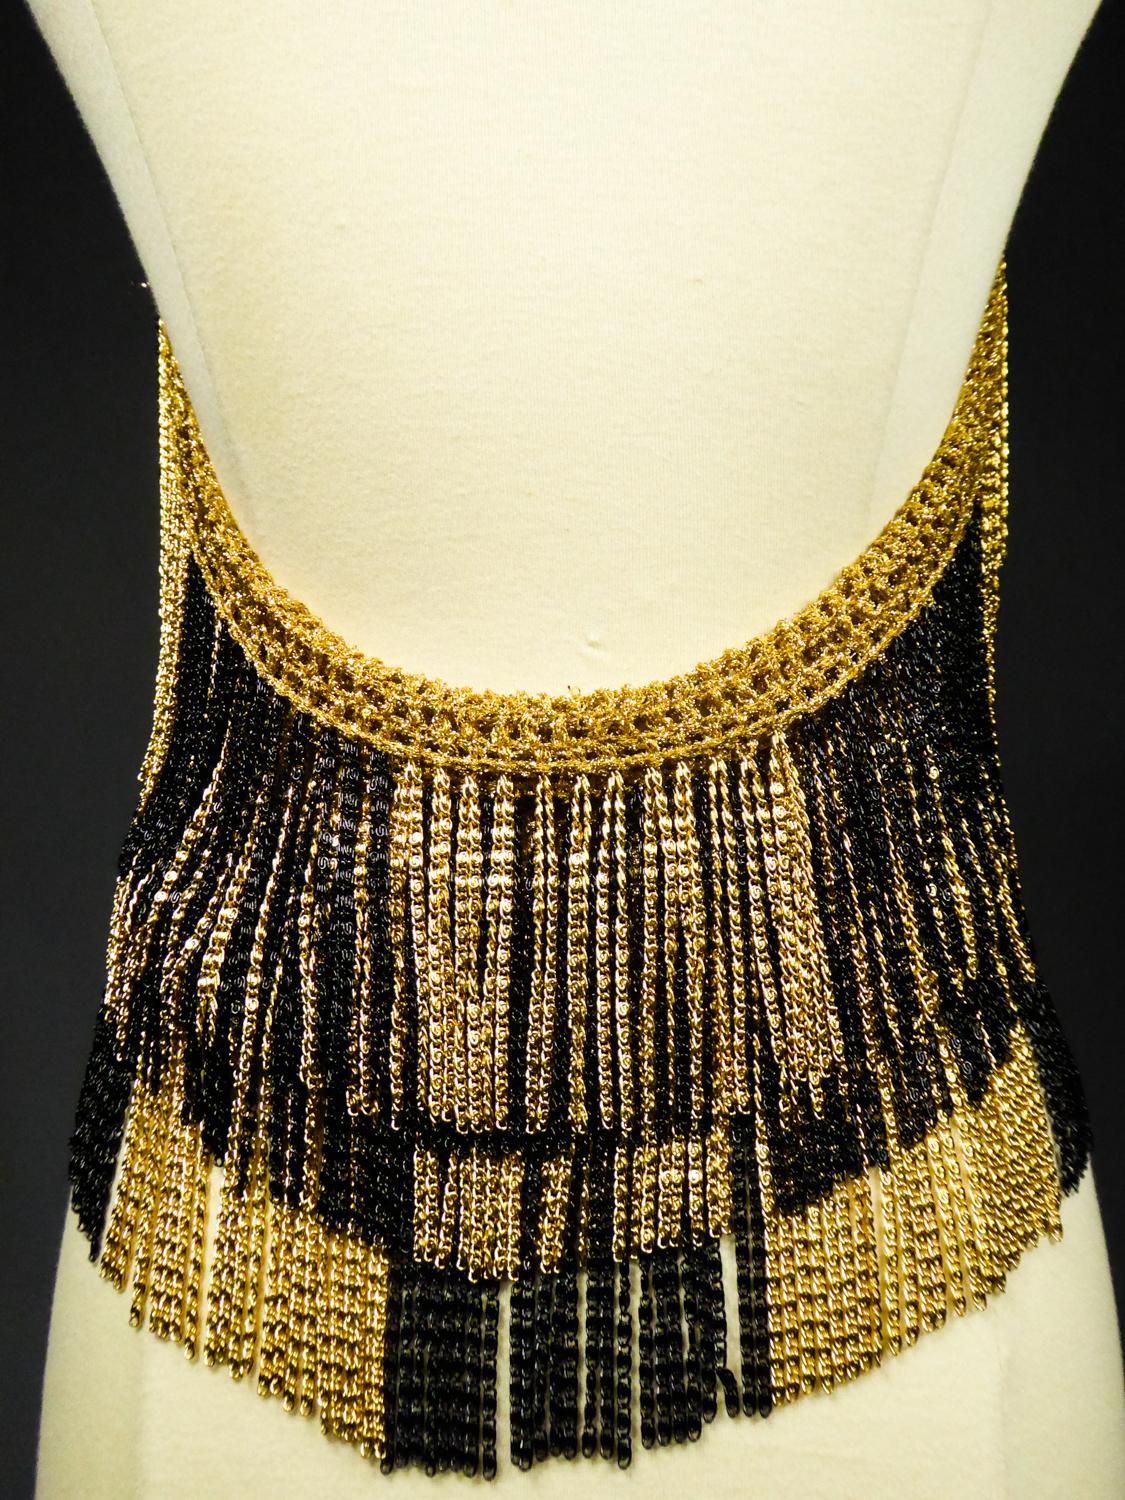 A Loris Azzaro French Couture Top in Lurex Circa 1970 For Sale 6